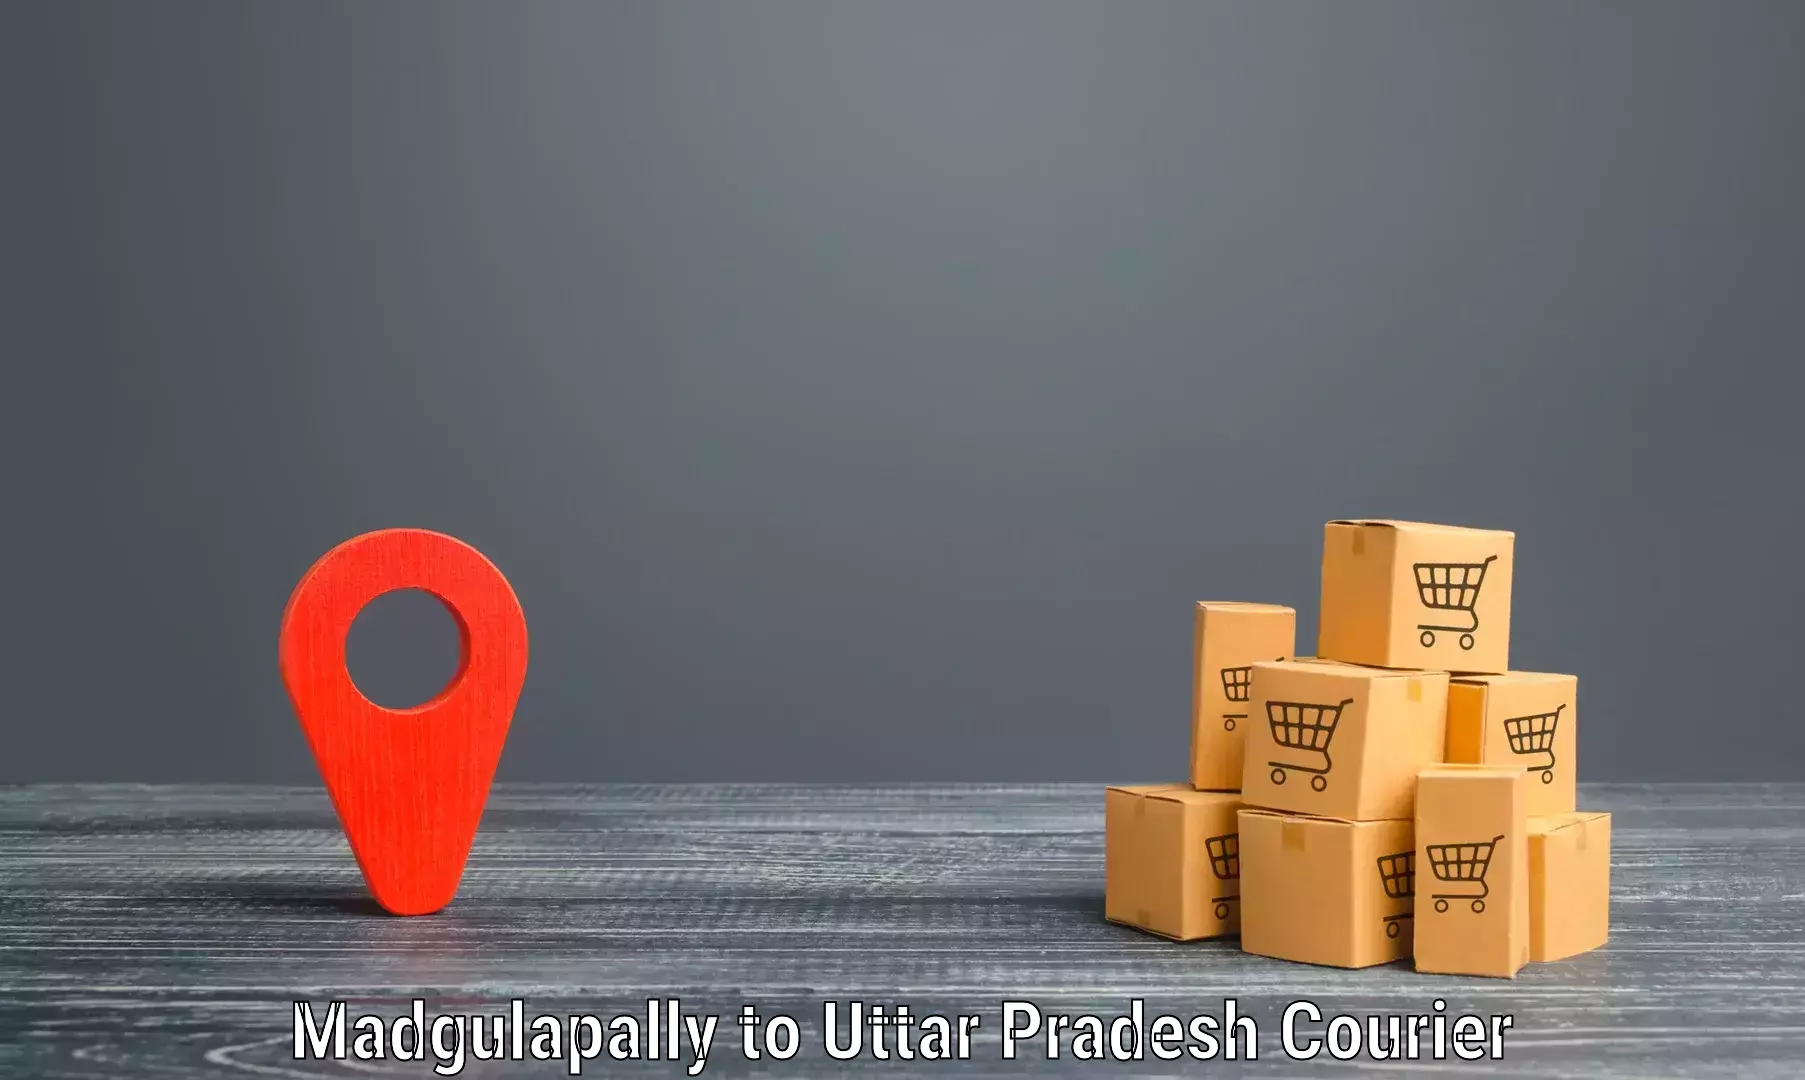 Customizable delivery plans in Madgulapally to Shahjahanpur